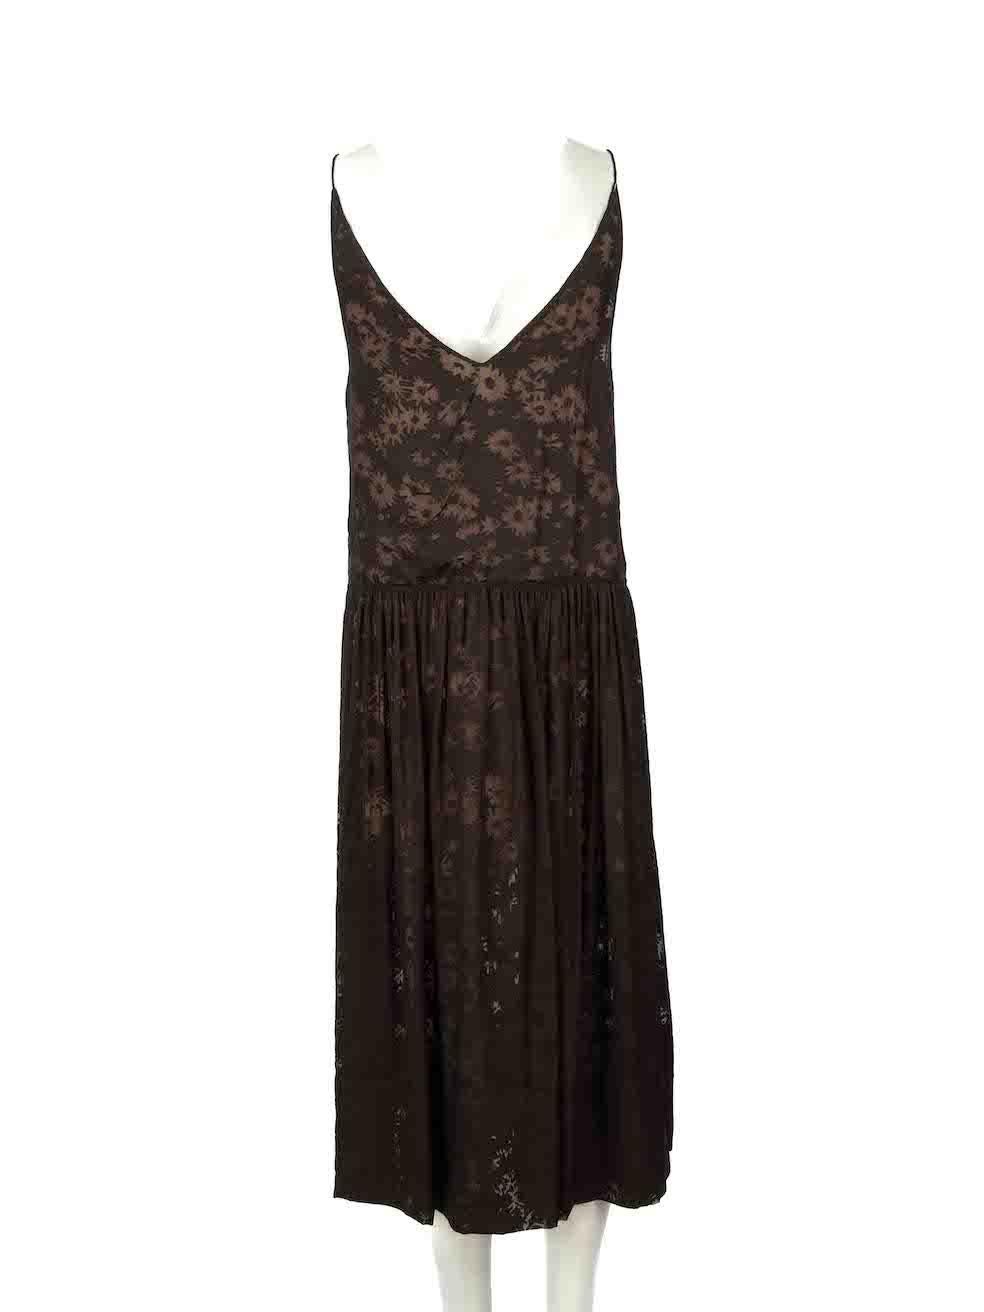 Stella McCartney Black Floral Keyhole Dress Size M In Excellent Condition For Sale In London, GB